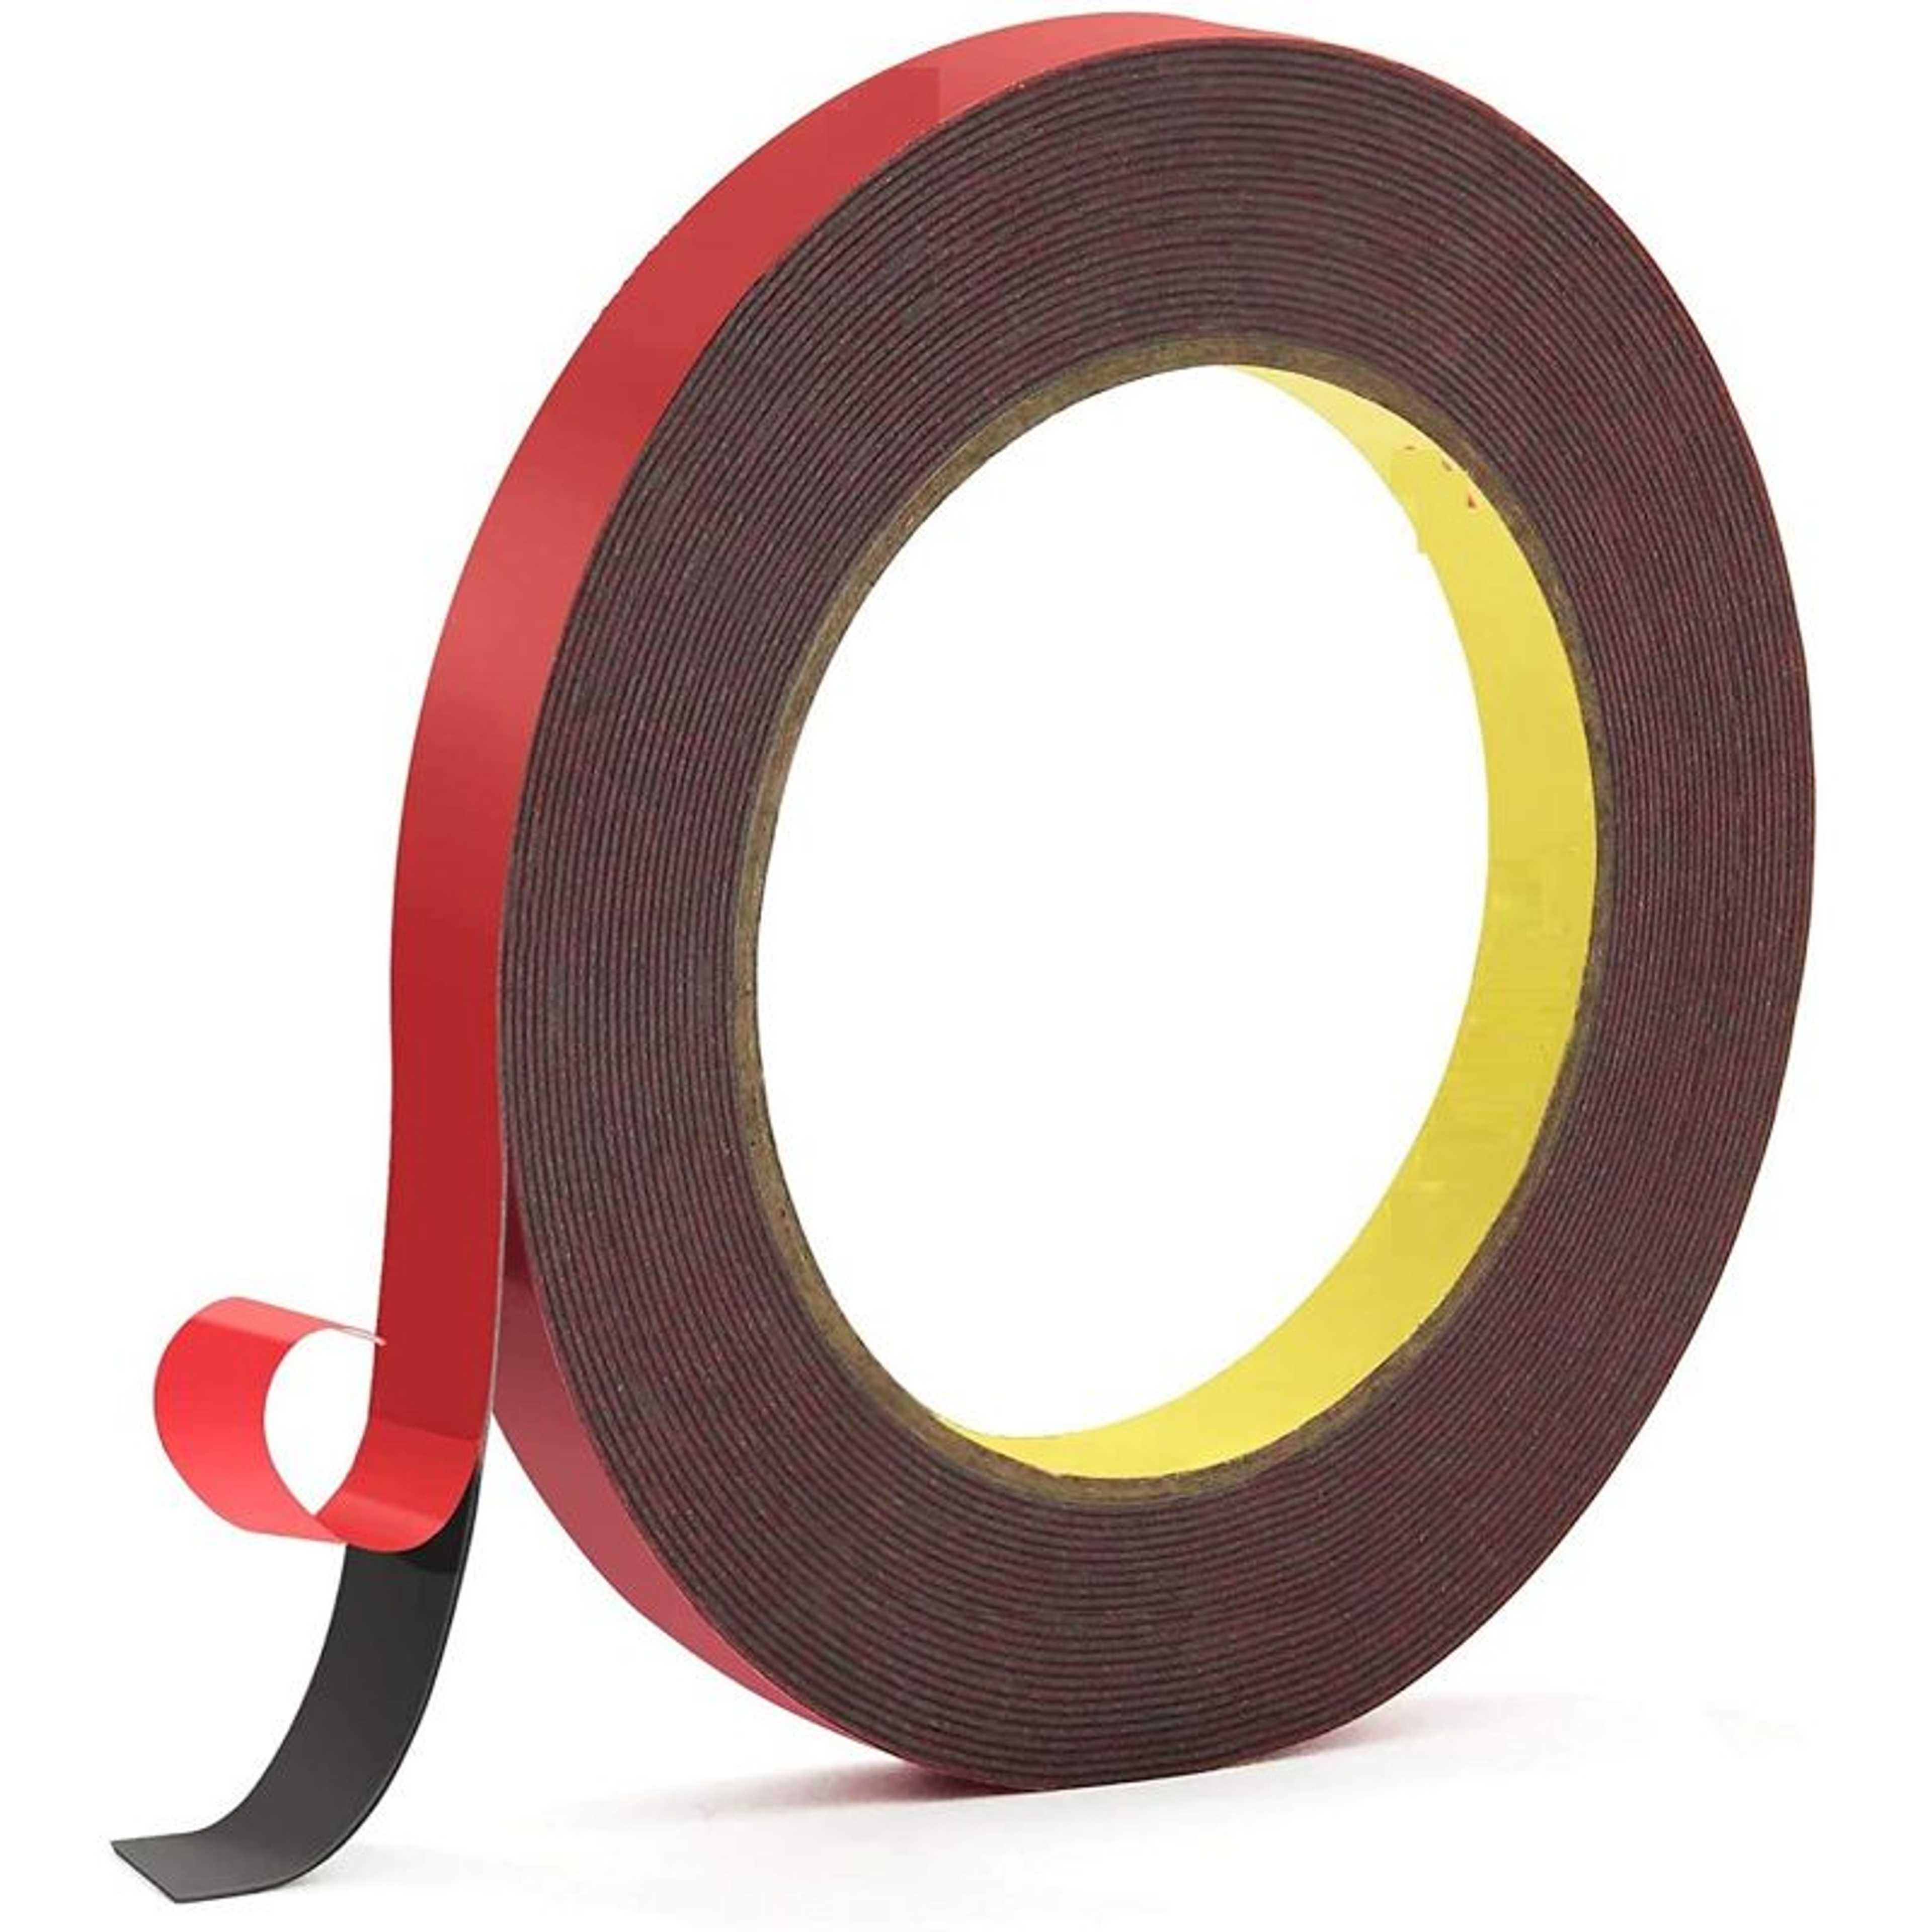 100 Feet 0.5'' Width Double Sided Tape, Outdoor and Indoor Heavy Duty Strong Weatherproof Adhesive Tape